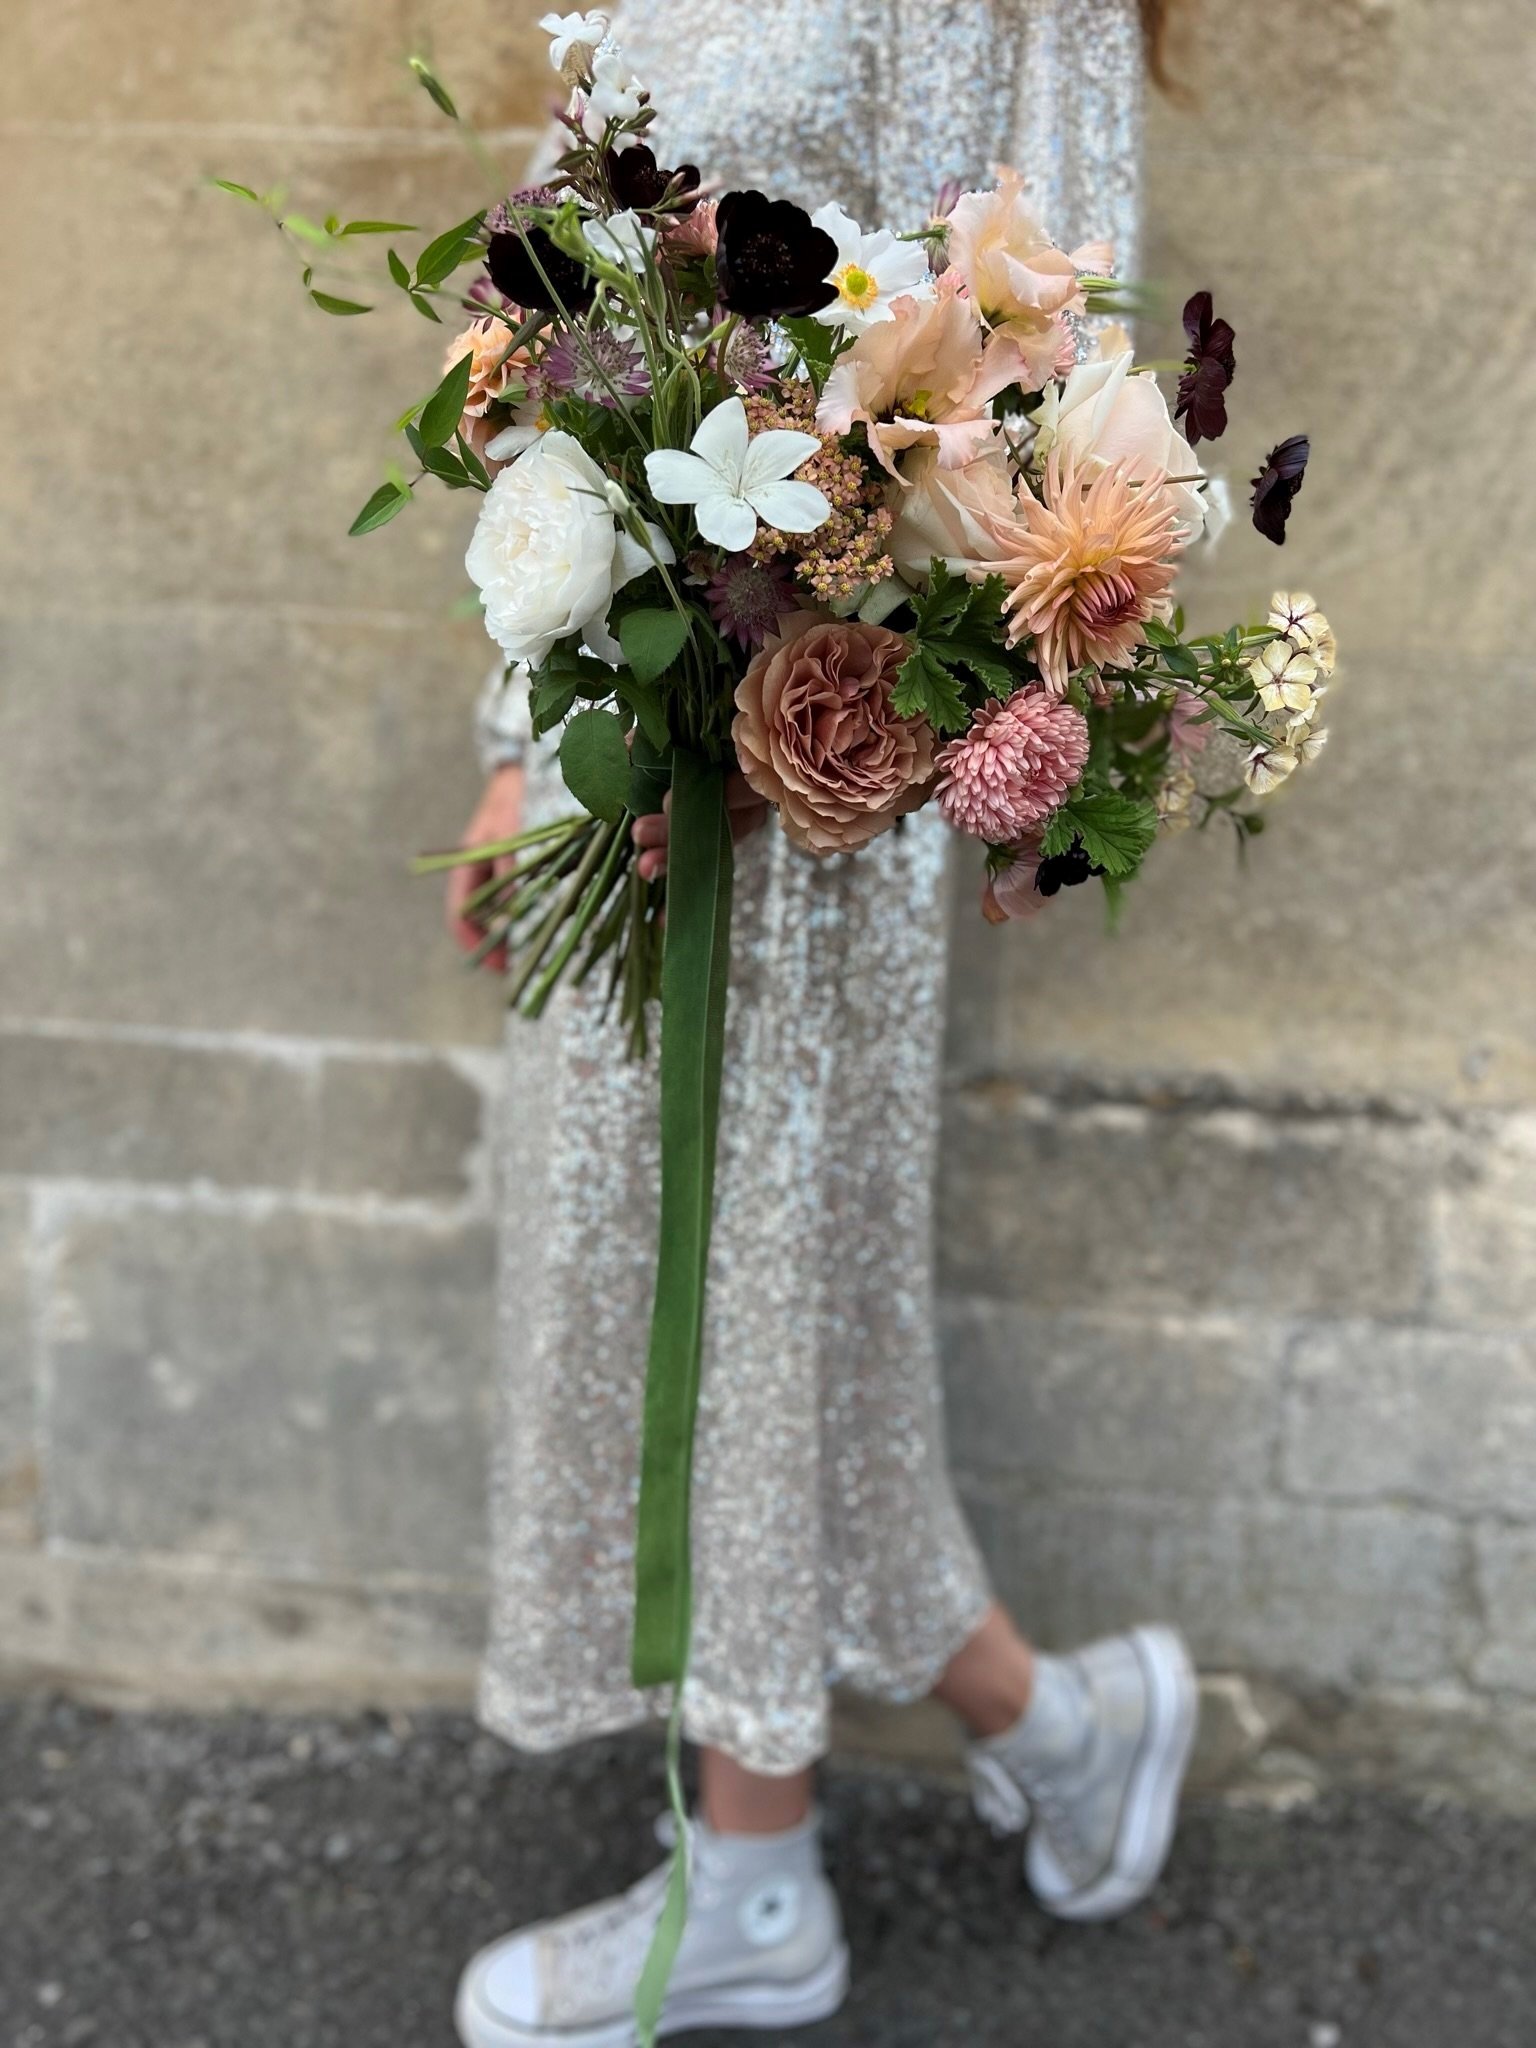 Student wearing sequin wedding dress, converse trainers holding a autumnal bridal bouquet